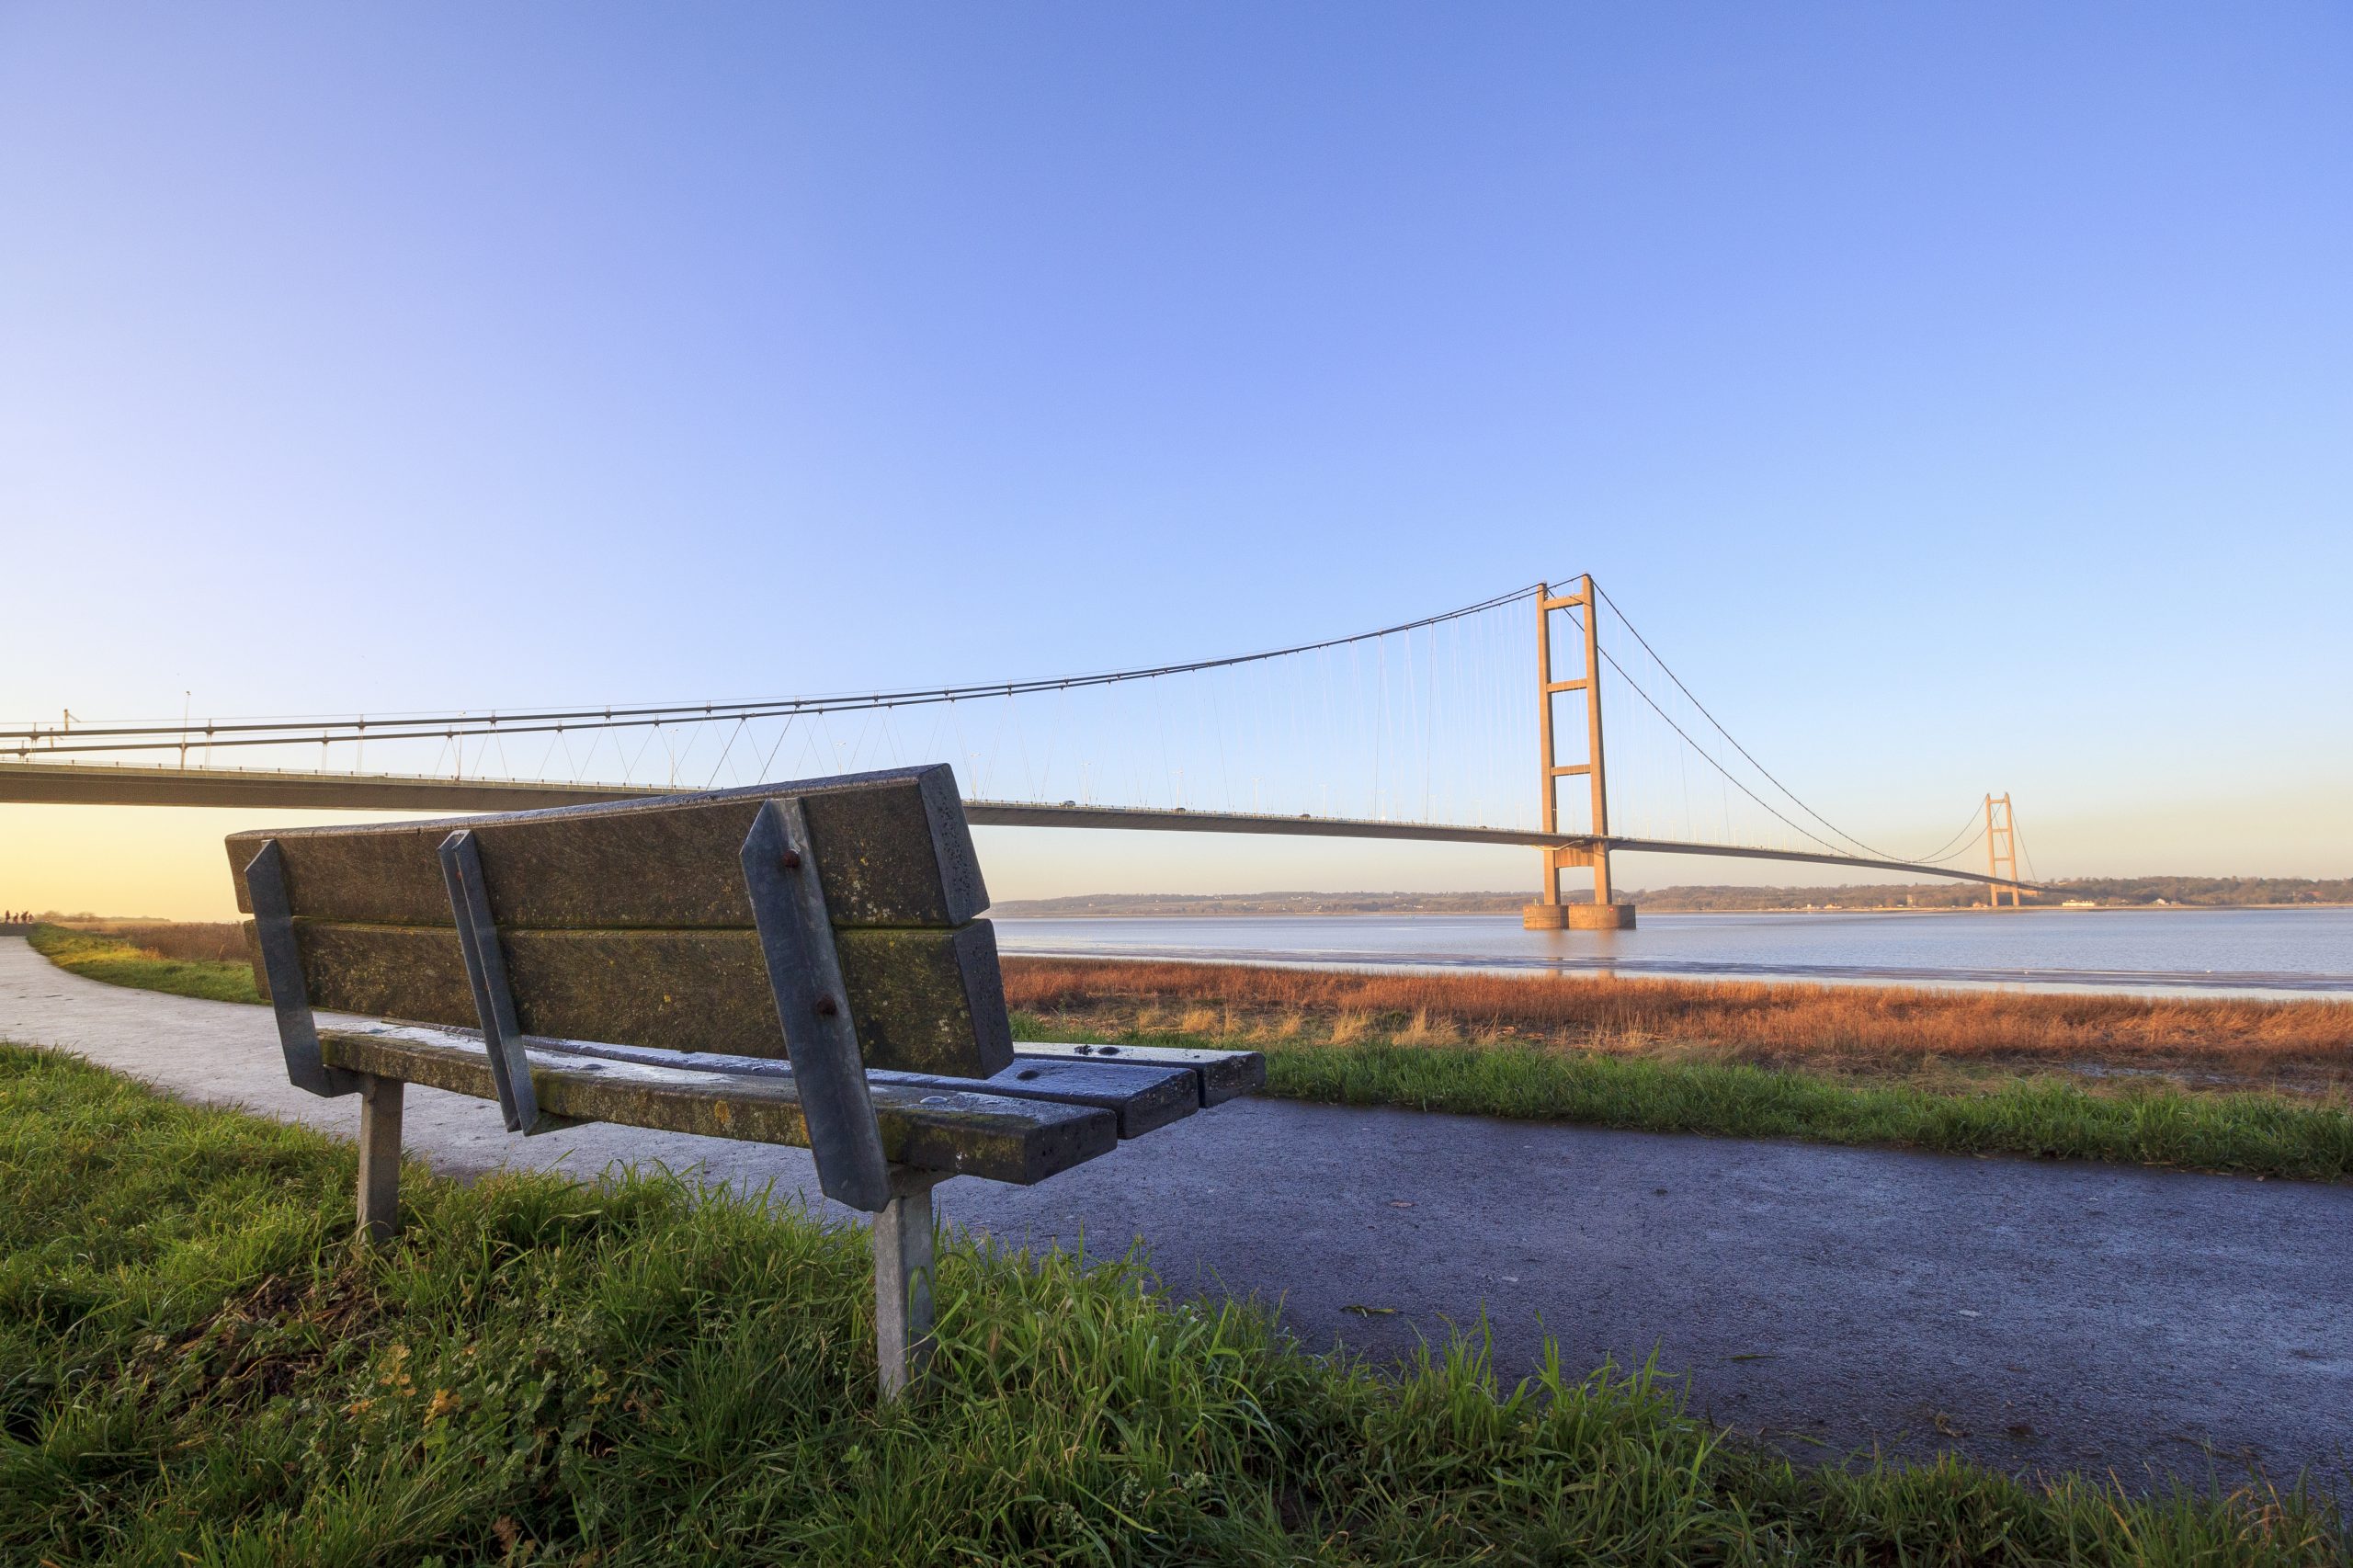 Bench with view of the Humber Bridge